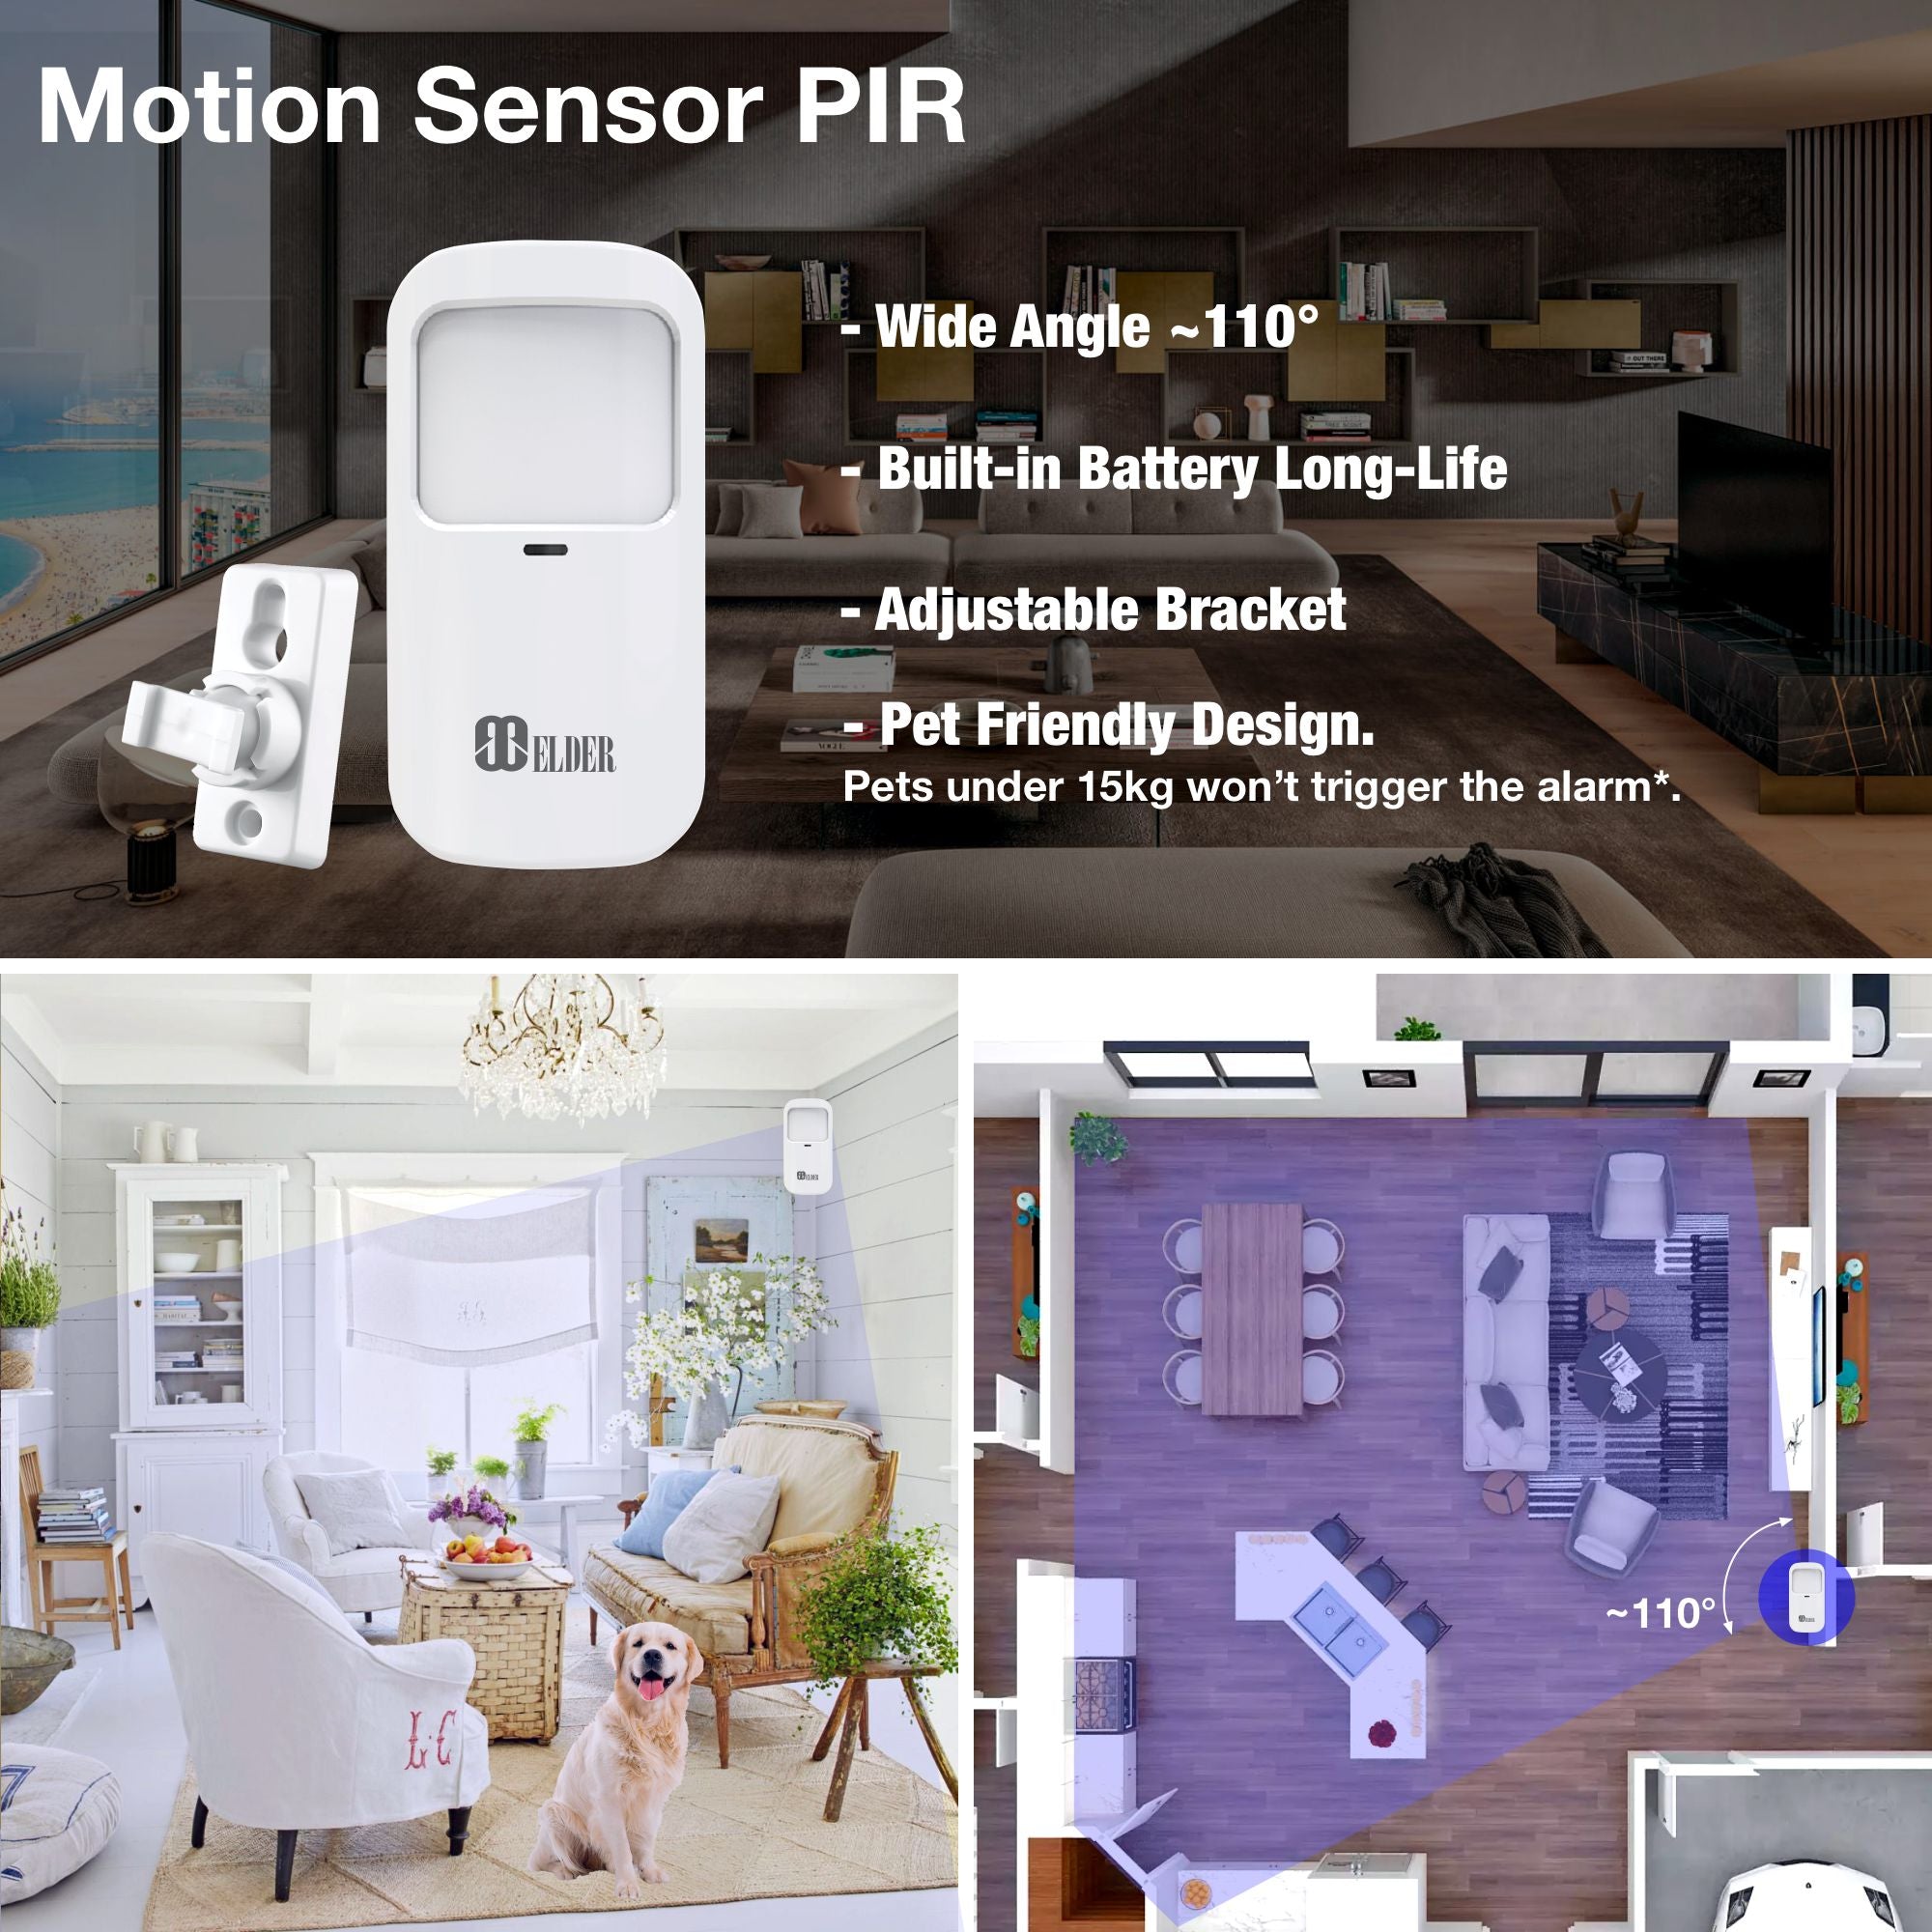 Motion Sensor PIR WiFi Battery Wireless, Pet Friendly & Wide Angle, Motion Detector for Alarm System and Smart Home Automation